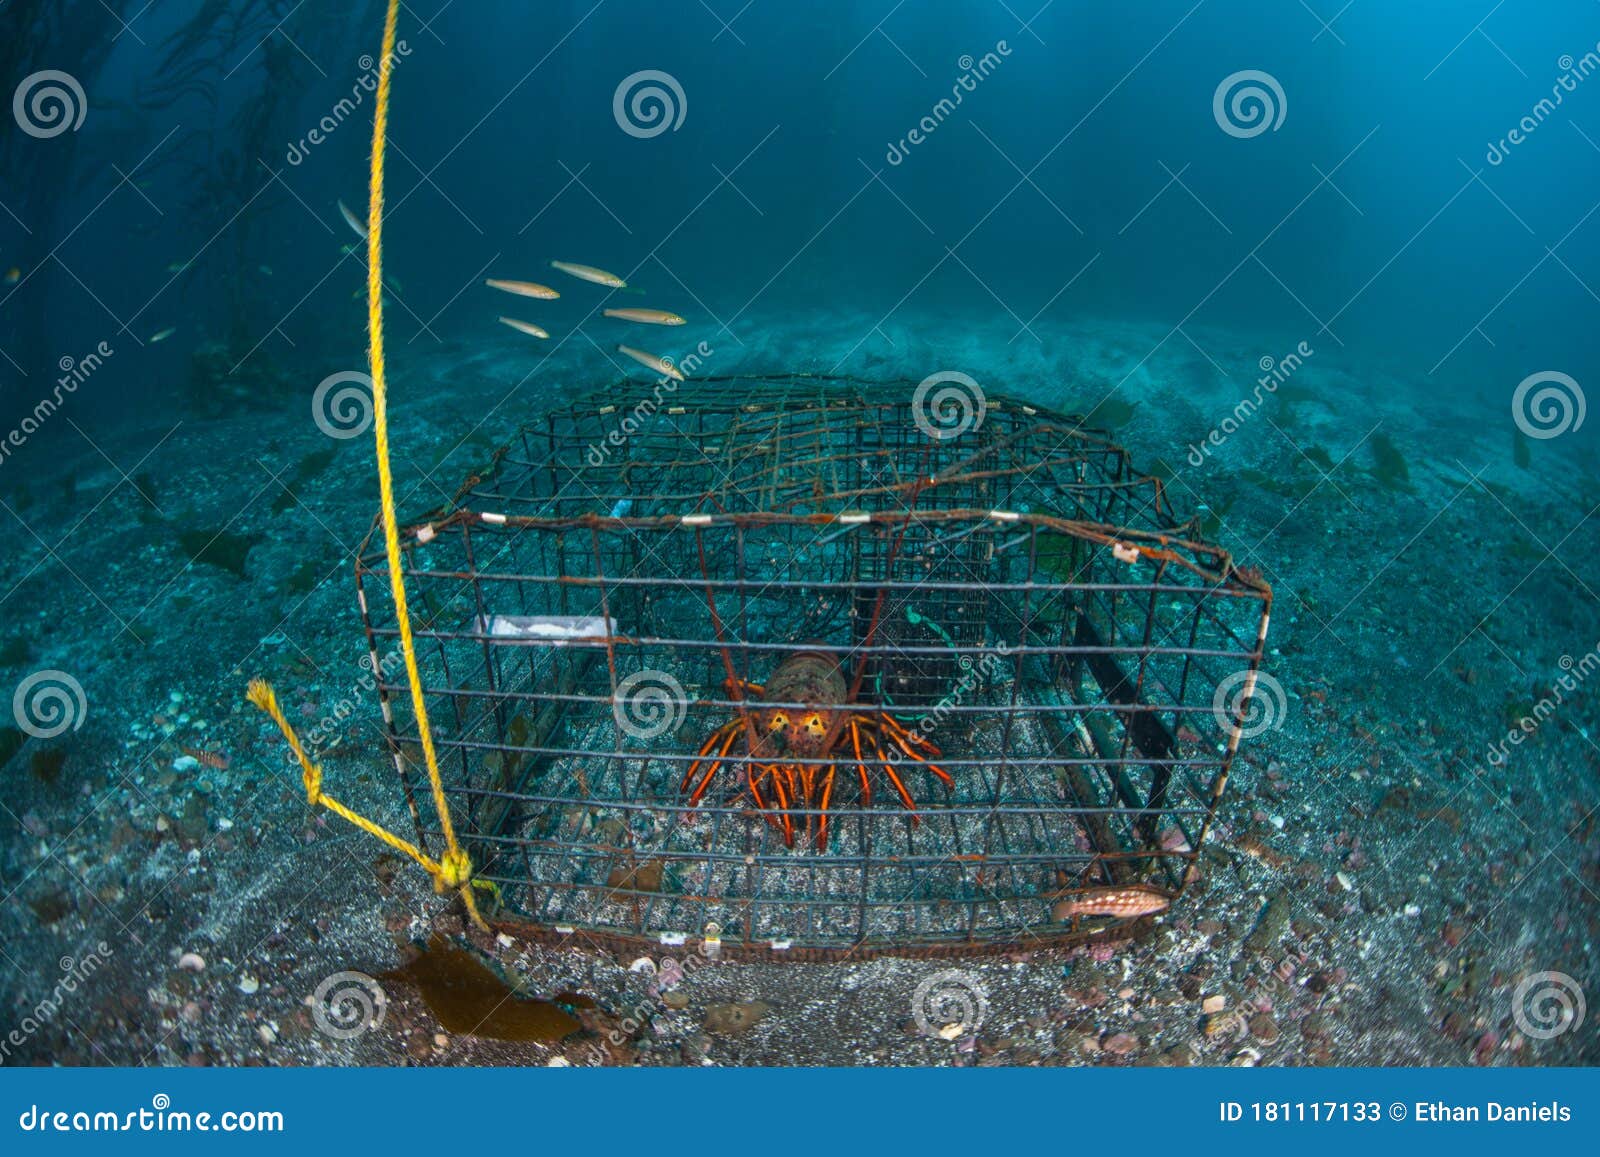 https://thumbs.dreamstime.com/z/california-spiny-lobster-panulirus-interruptus-caught-lobster-trap-off-coast-southern-california-most-lobsters-181117133.jpg